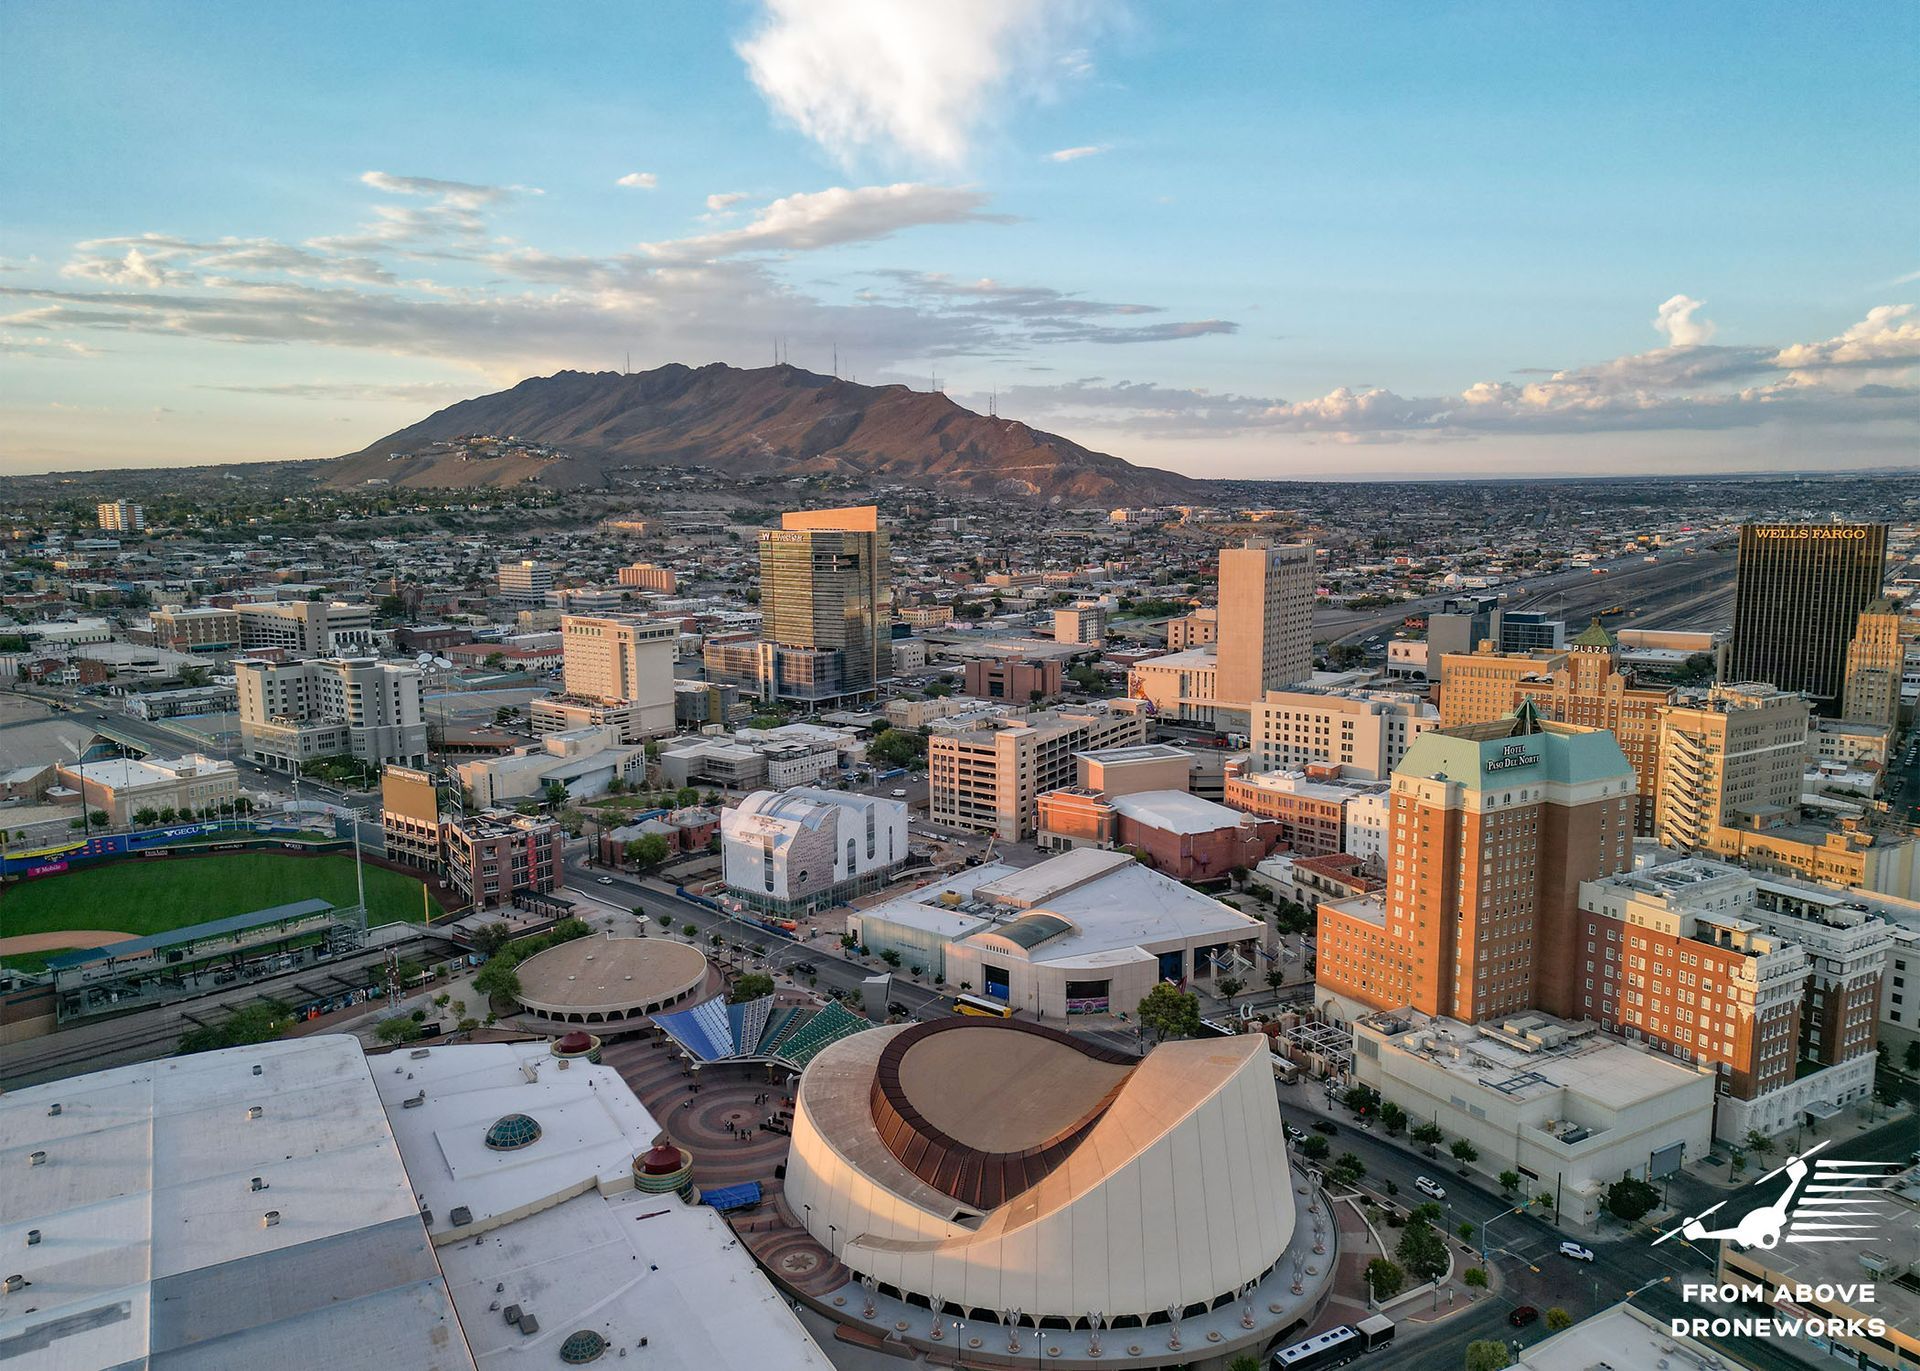 Downtown El Paso with Mountain View: An image capturing the downtown area of El Paso with a picturesque mountainous backdrop. The photo displays the cityscape, buildings, streets, and possibly landmarks, framed against the backdrop of prominent mountains. It showcases the scenic beauty and urban landscape of downtown El Paso with the stunning mountainous vista in the background.